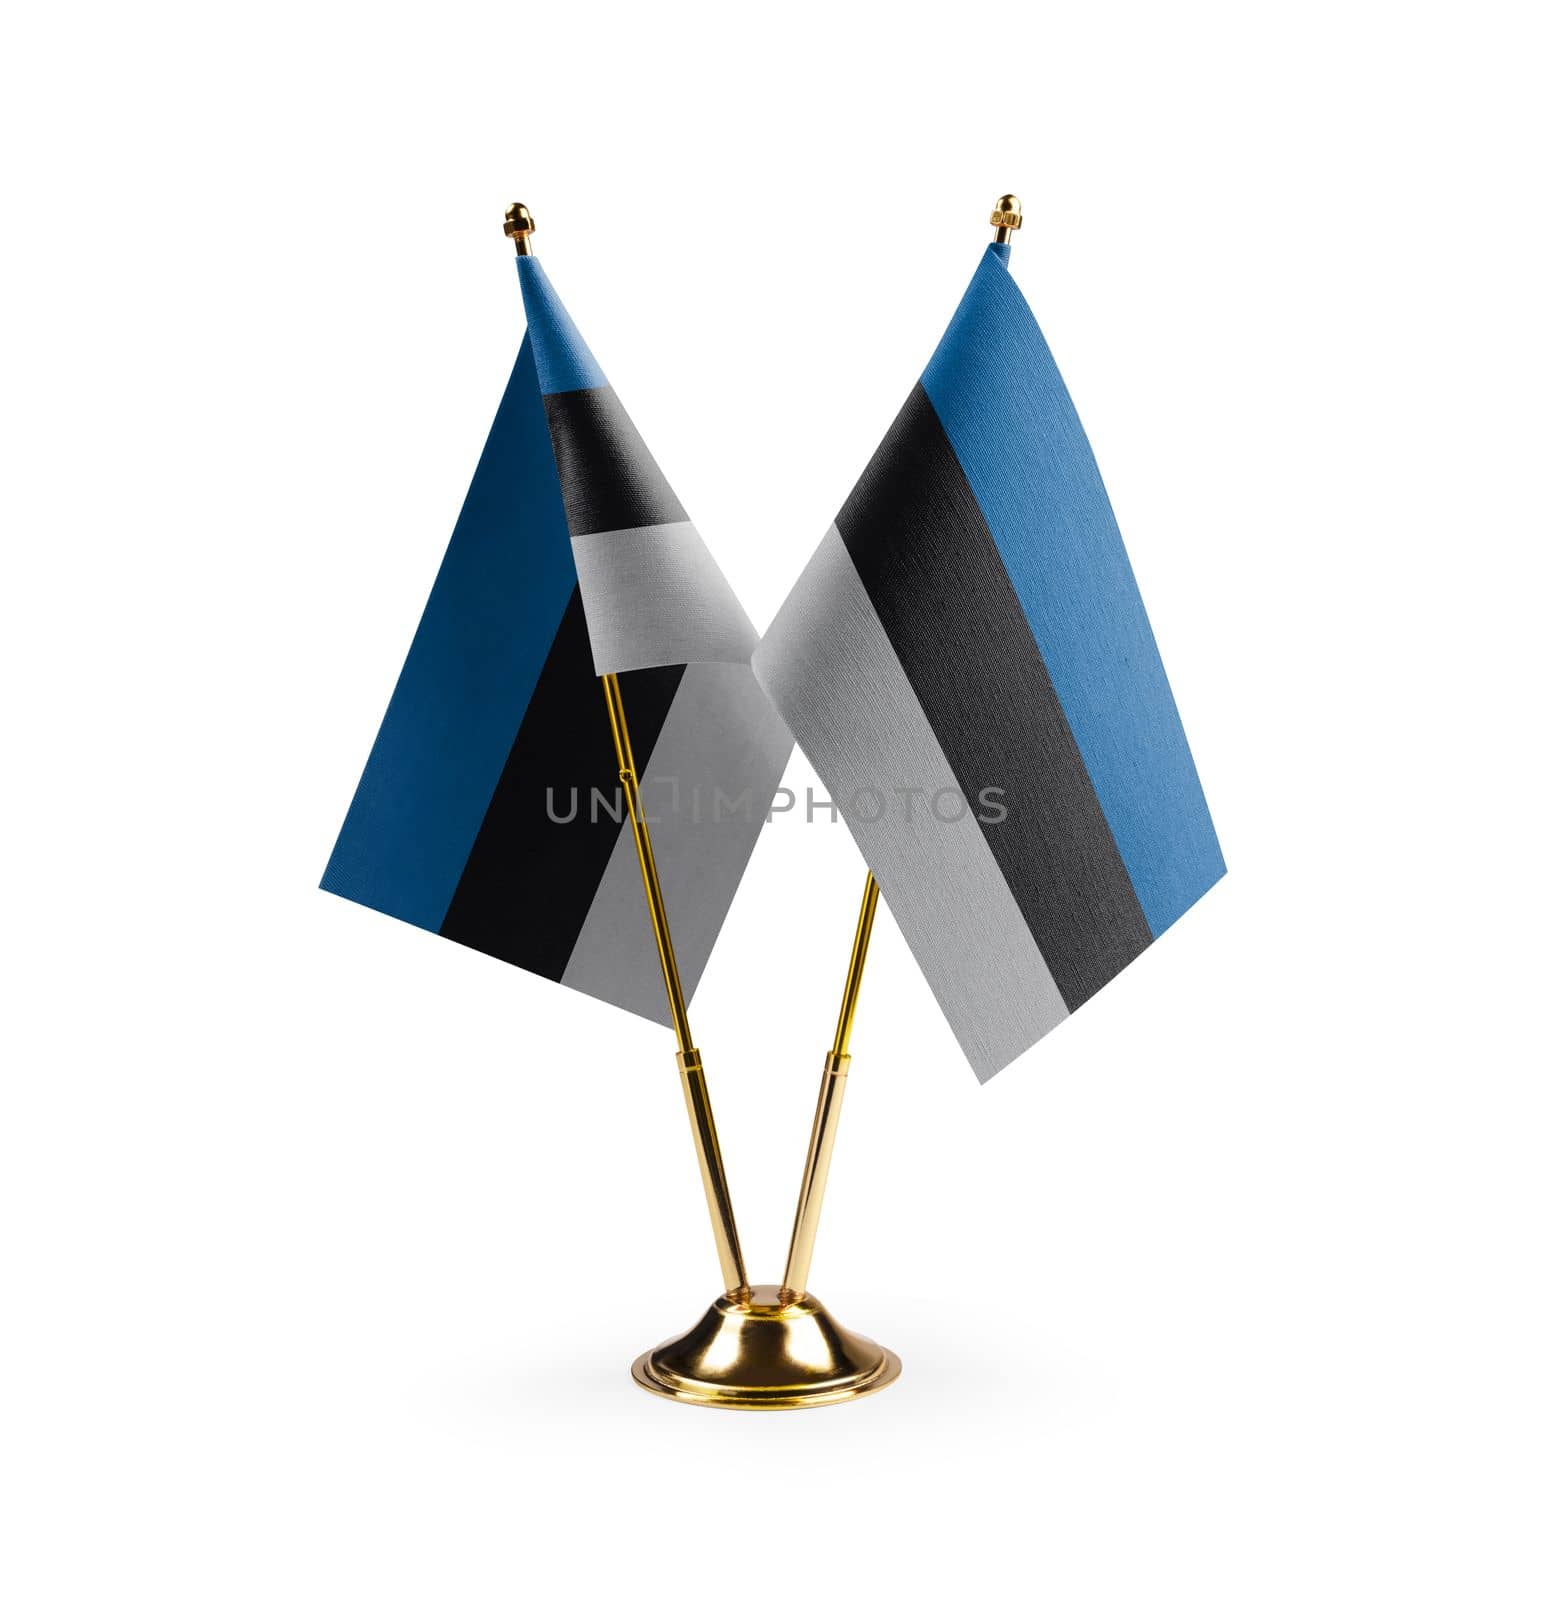 Small national flags of the Estonia on a white background.